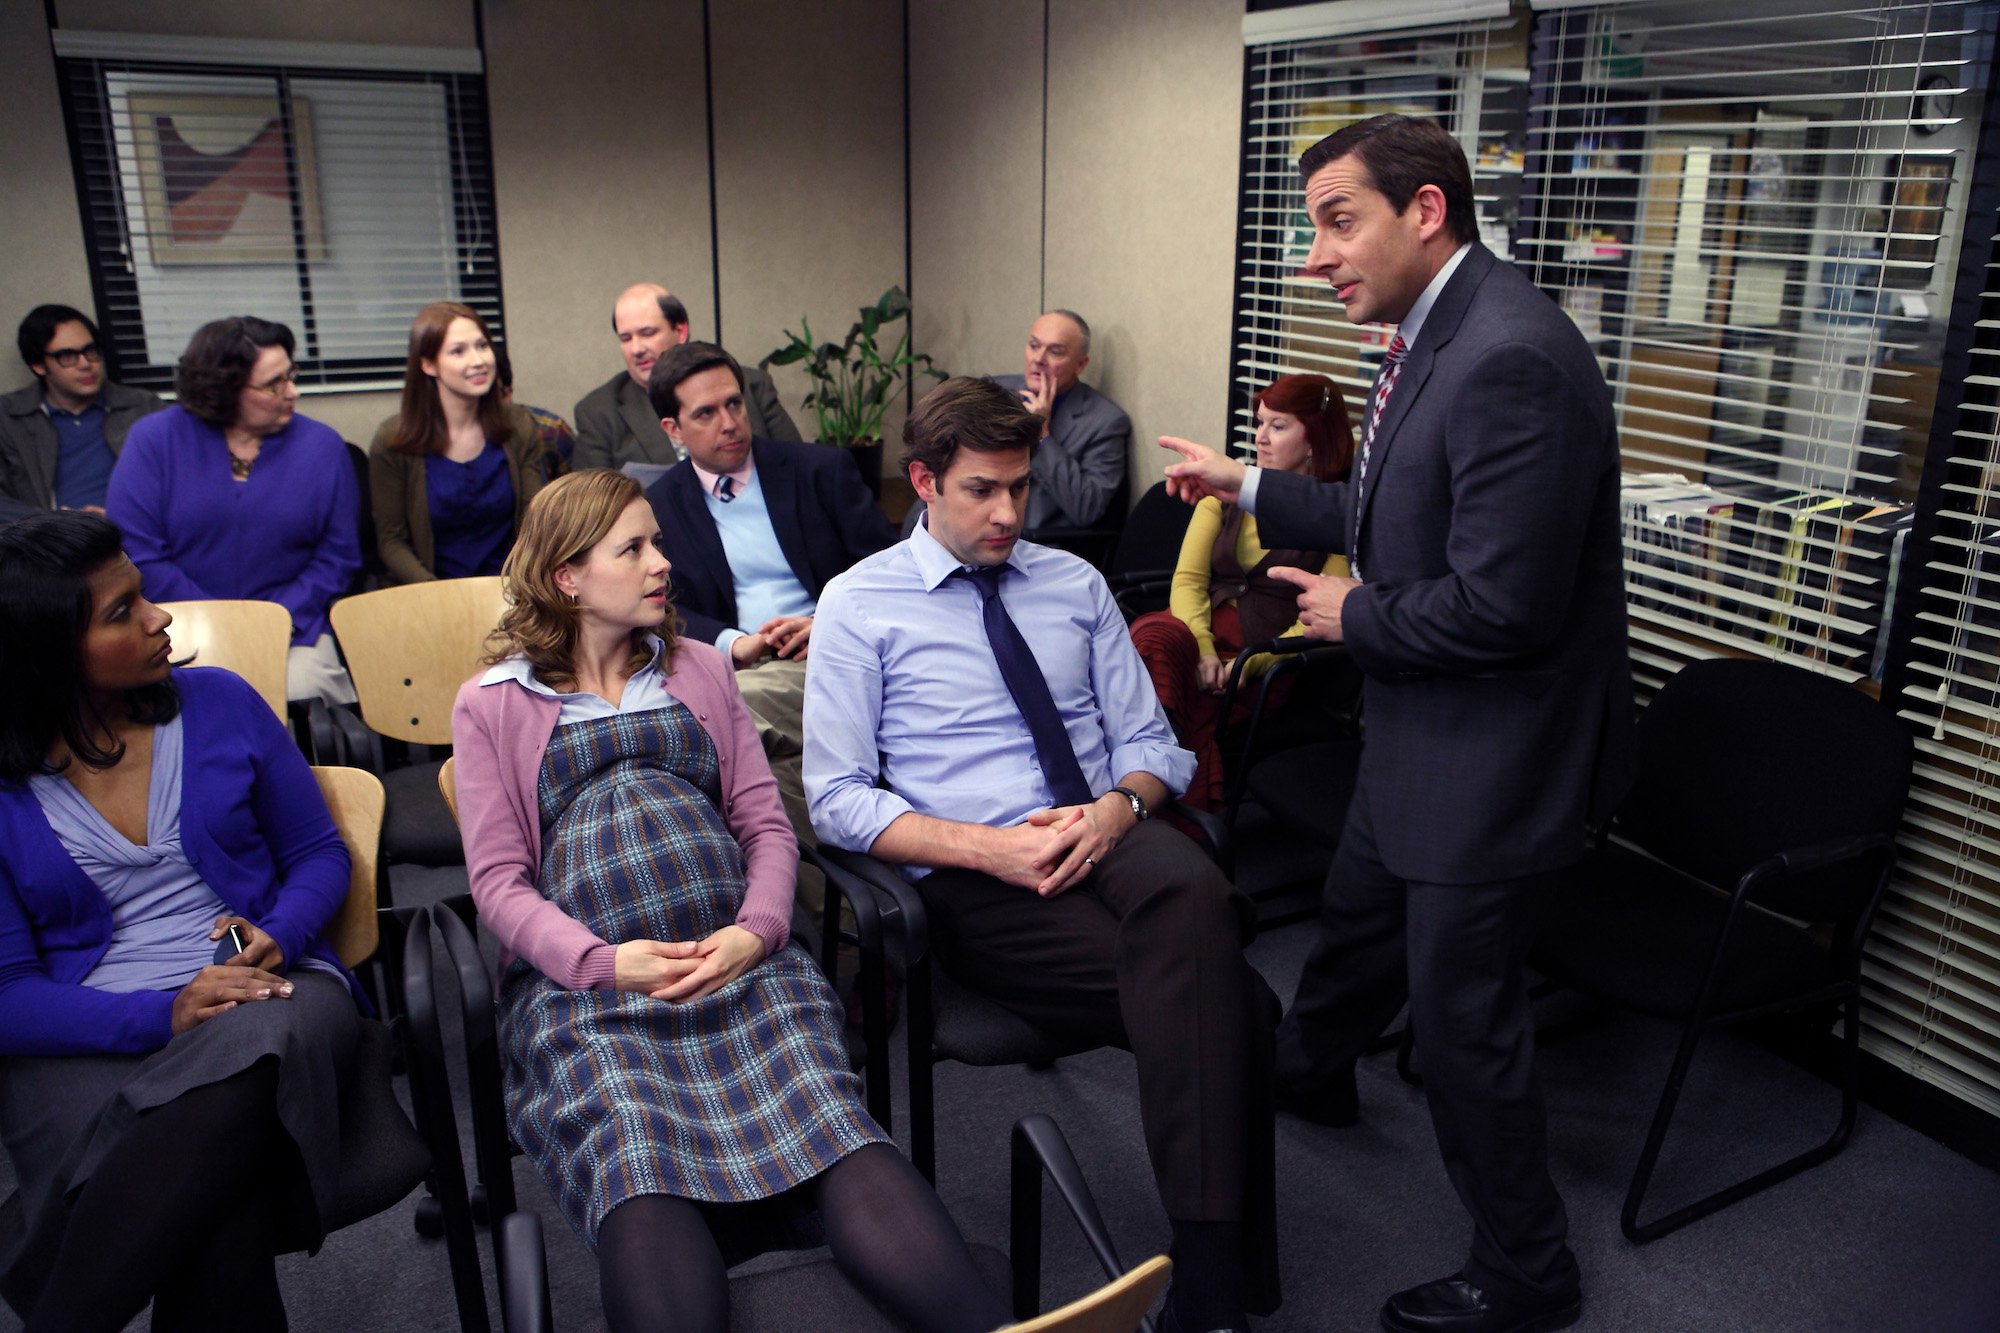 The Office: Steve Carell lectures the ensemble cast in the meeting room